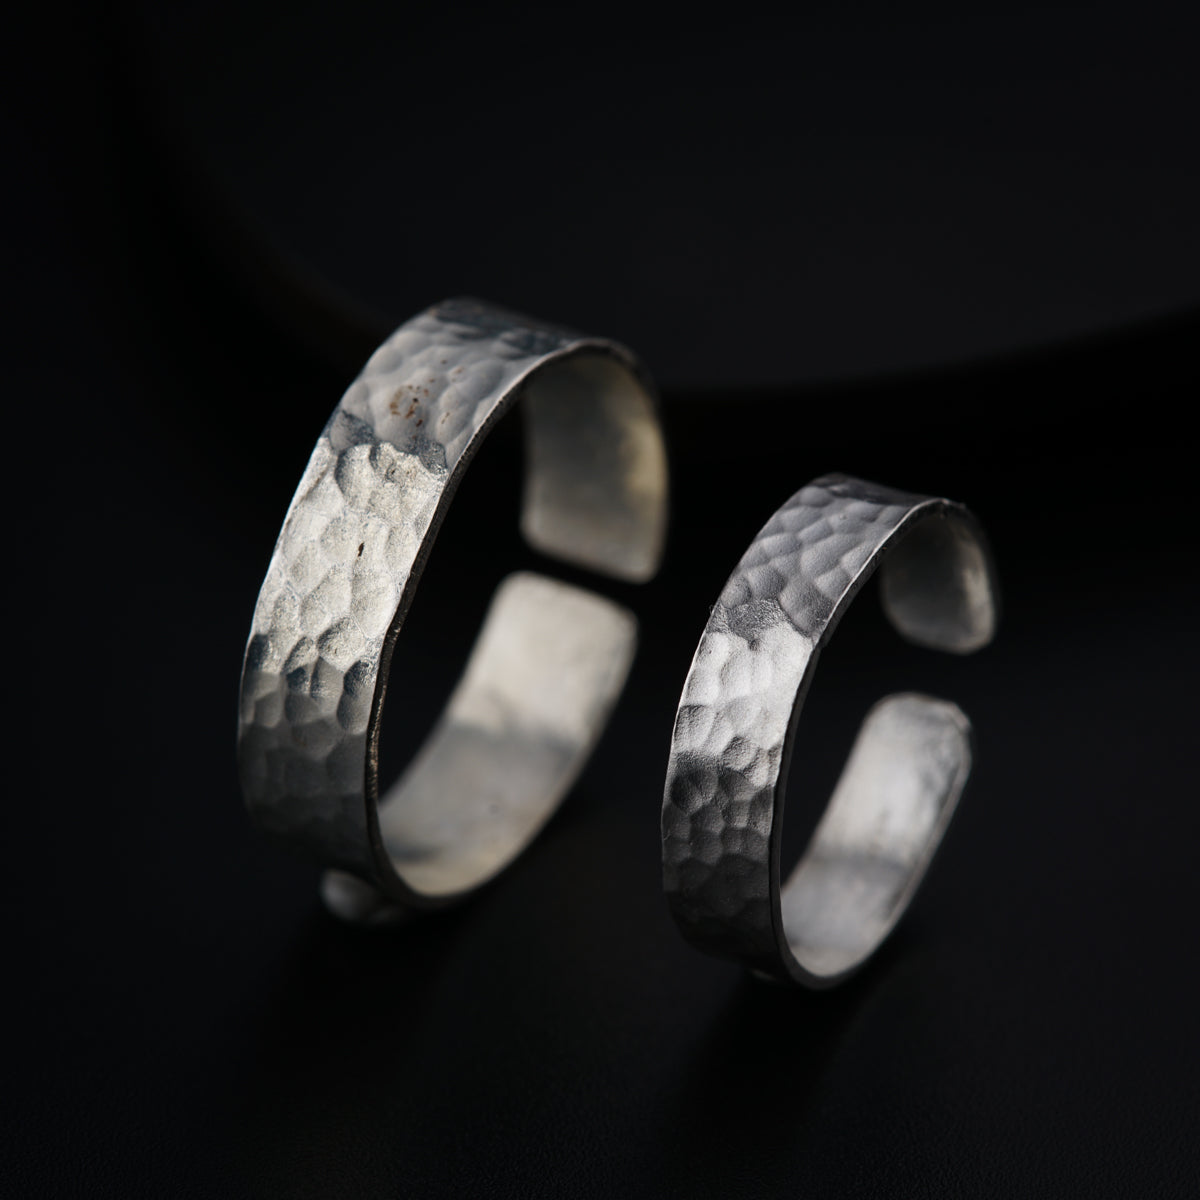 a pair of silver rings on a black background